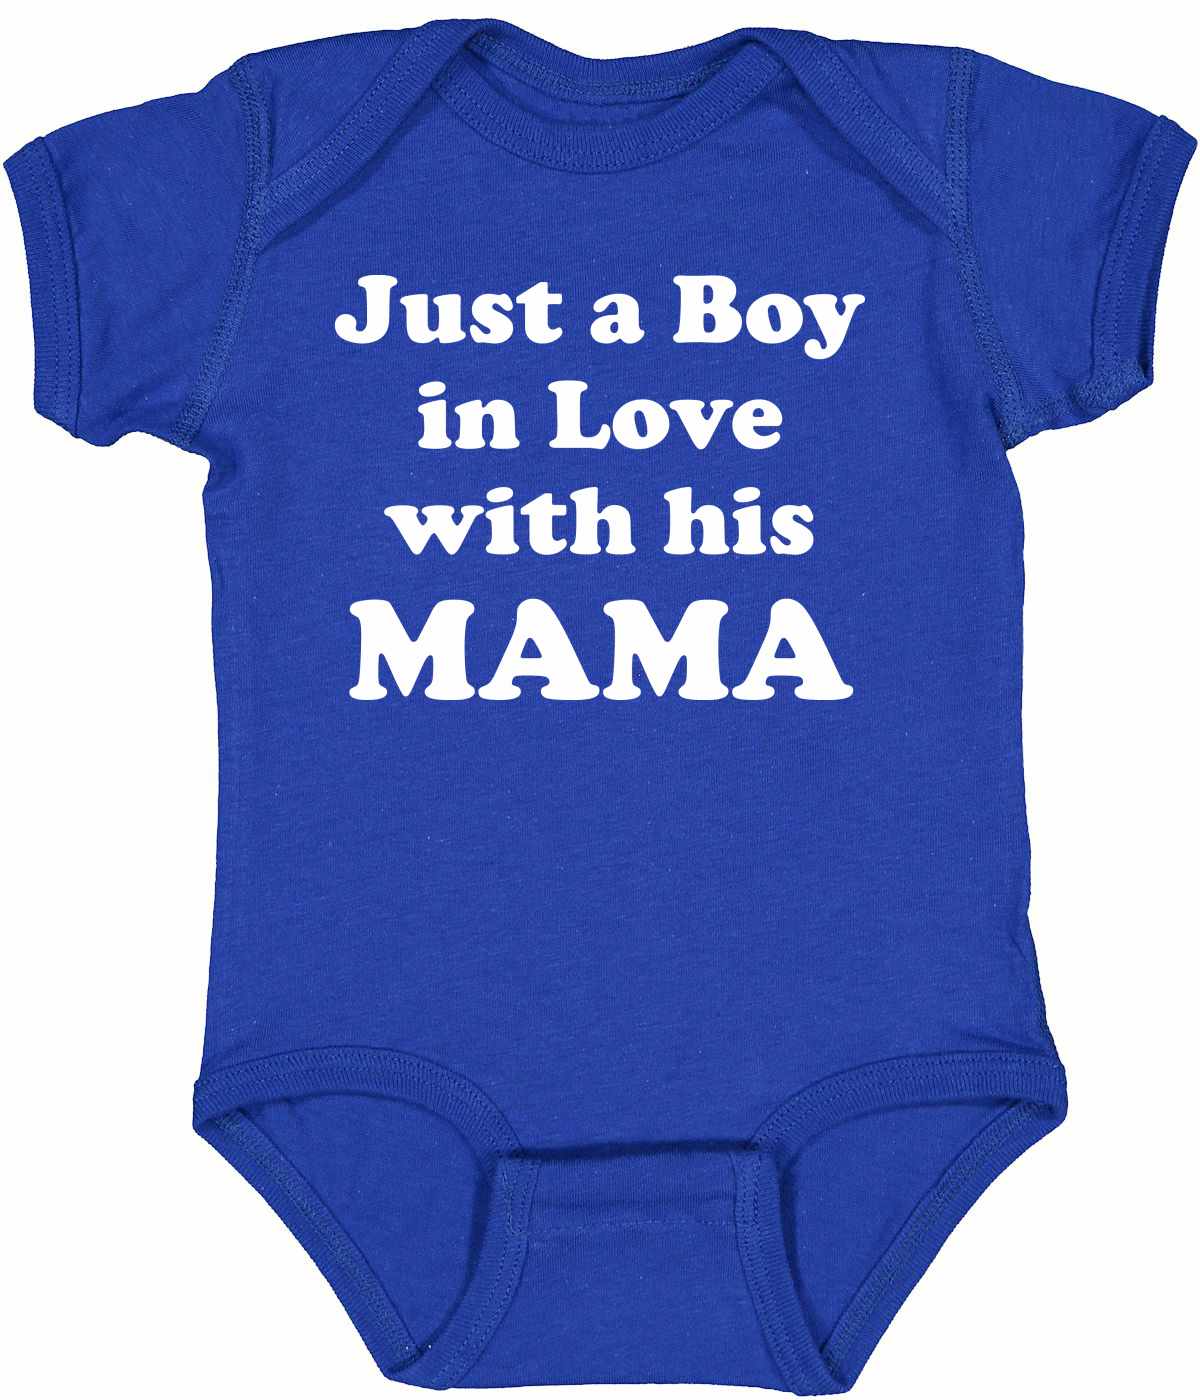 Just a Boy in Love with his MAMA Infant BodySuit (#1097-10)